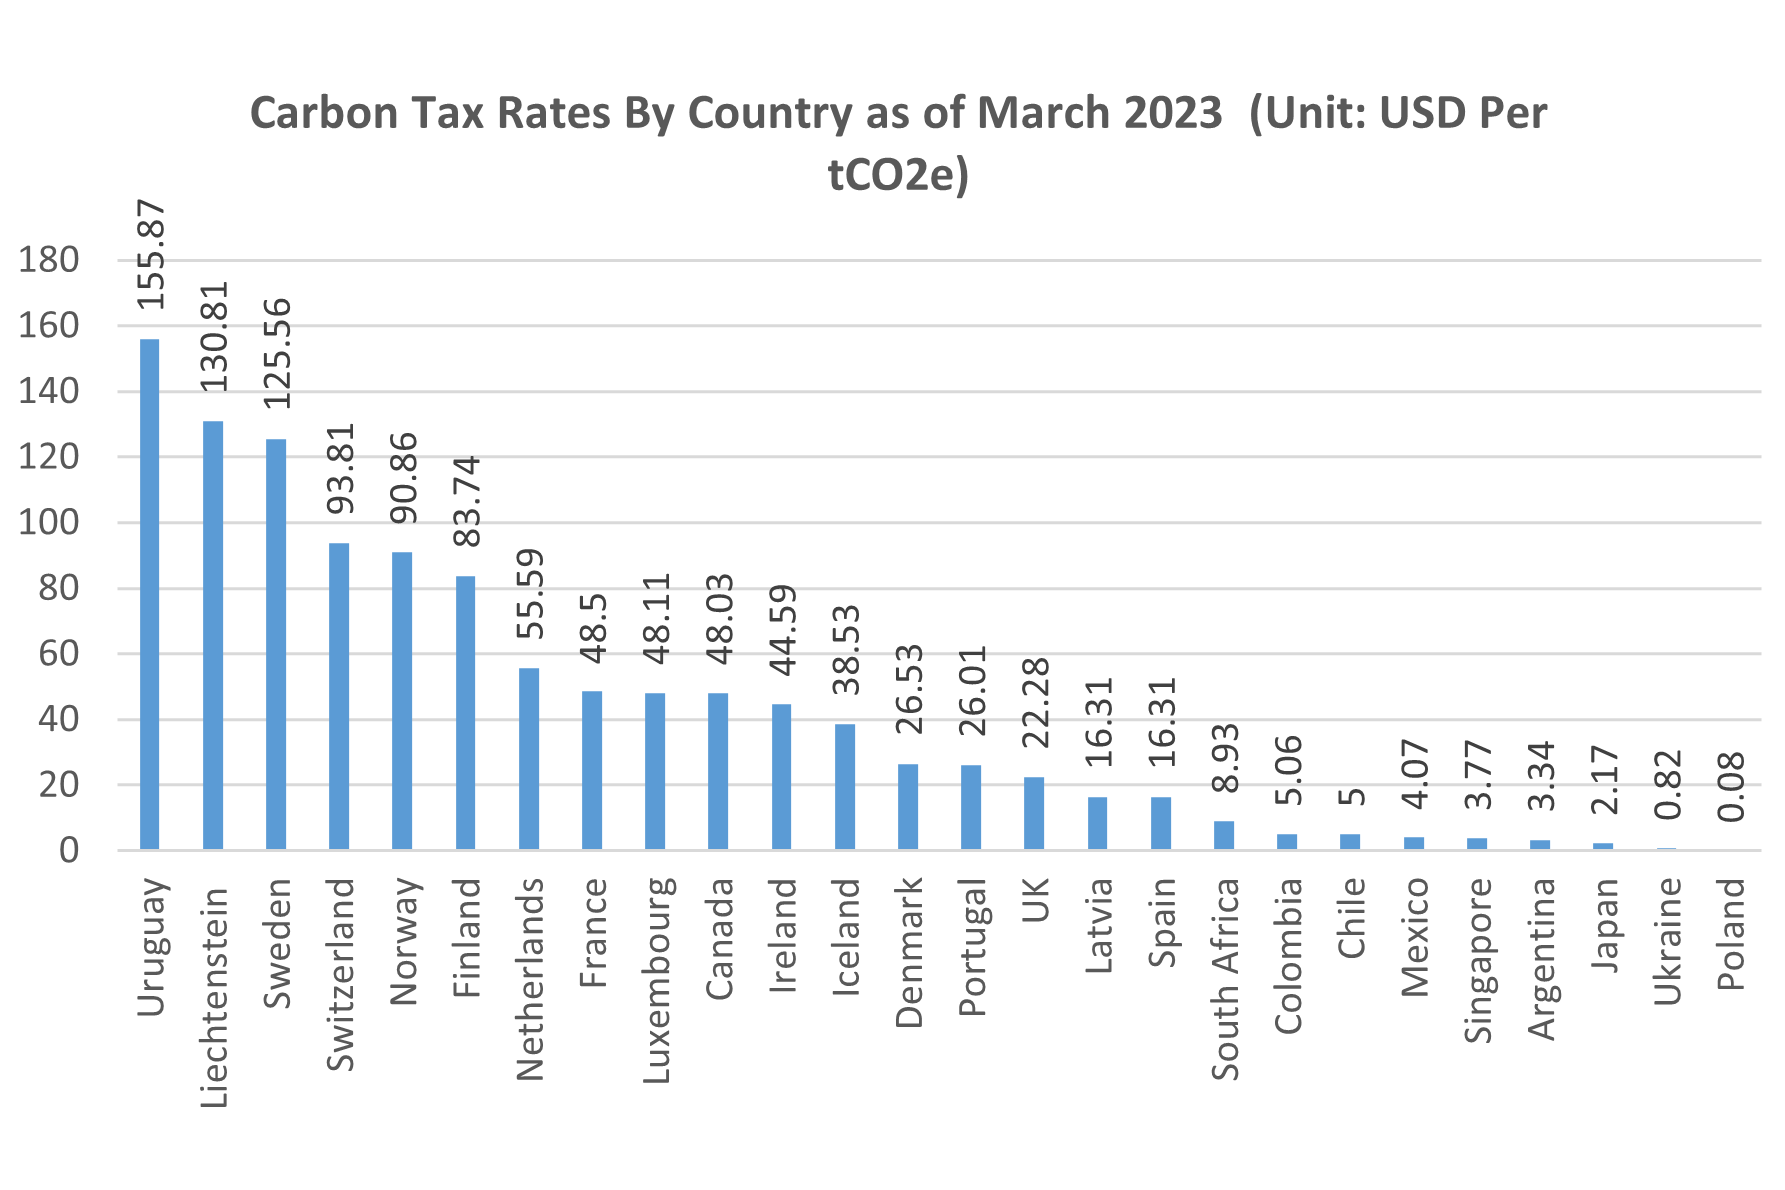 Carbon_Tax_Rate_in_26_Countries_2_8533_1.png